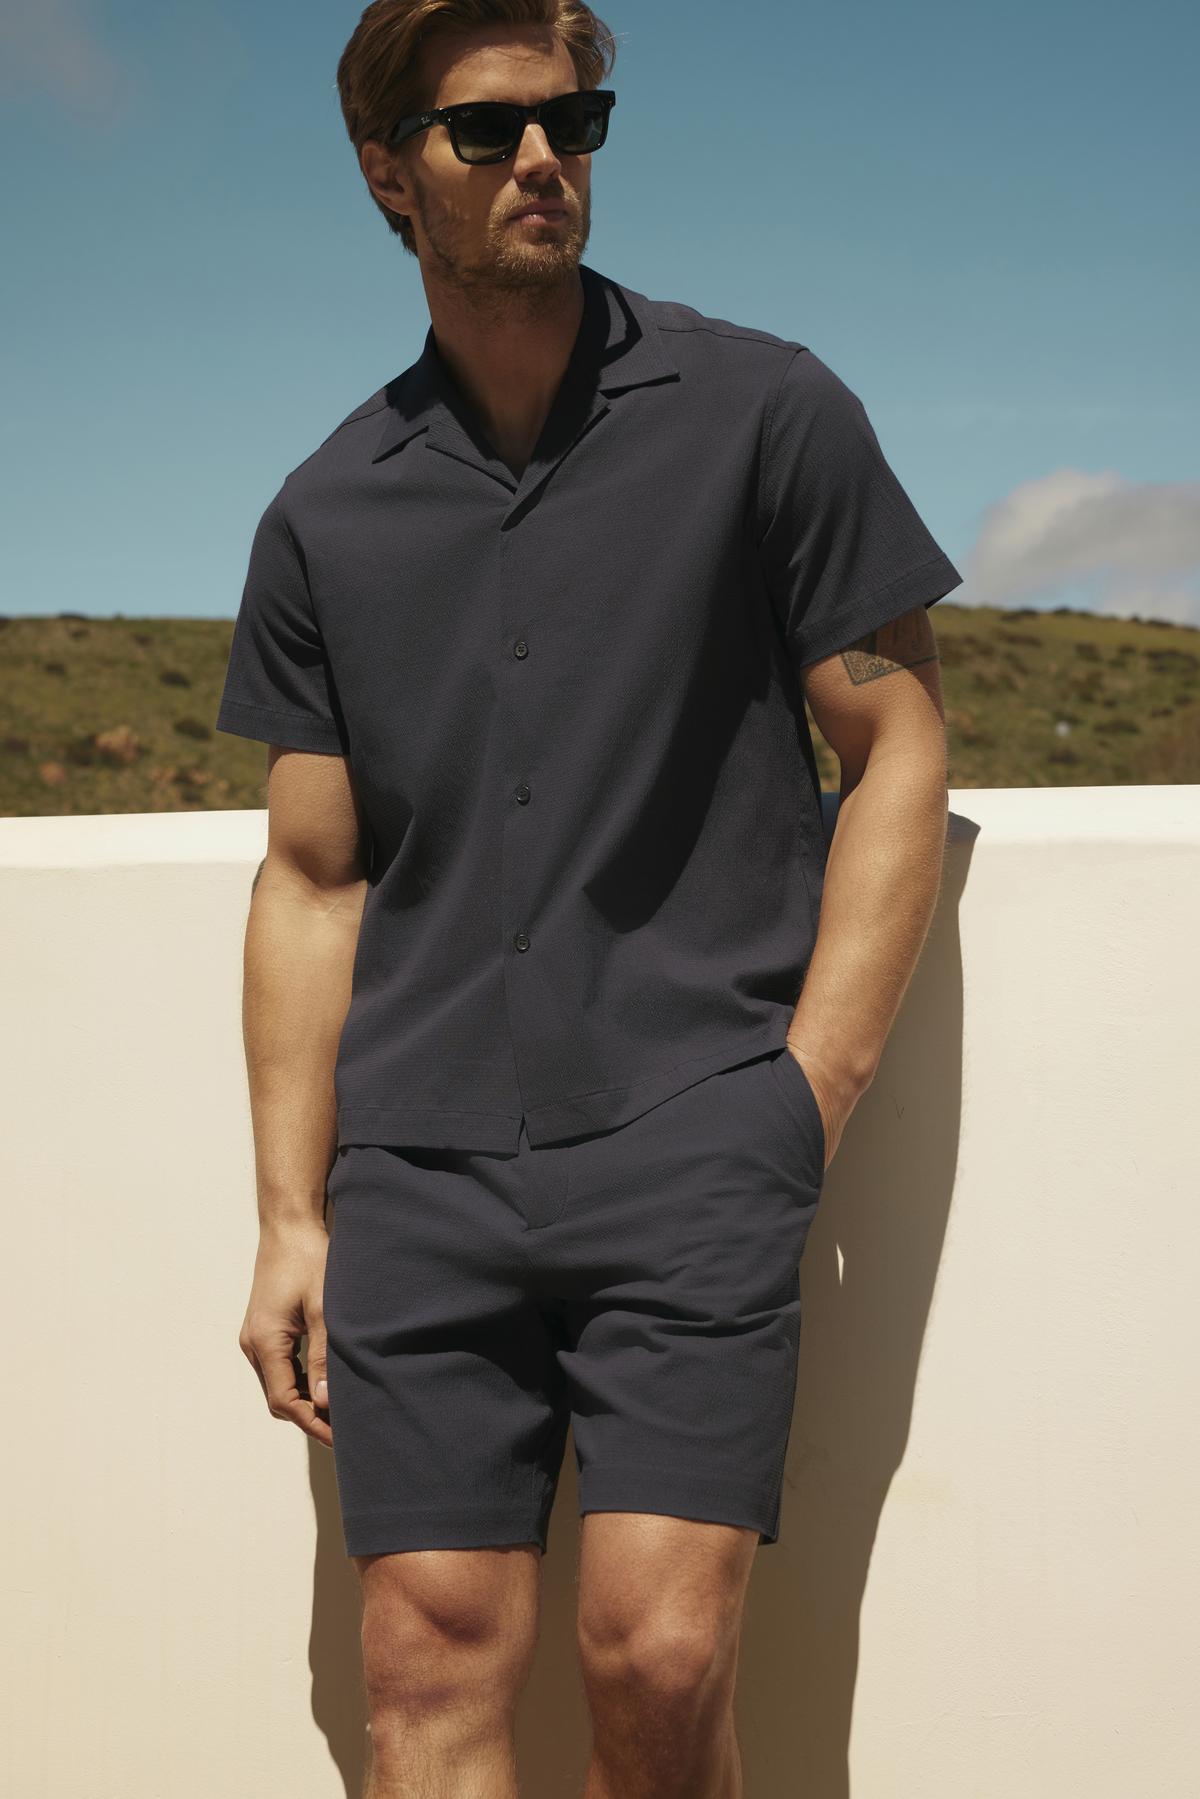 A man in sunglasses wearing a dark shirt and Velvet by Graham & Spencer Damian shorts stands against a white ledge with a clear blue sky in the background.-36753560502465